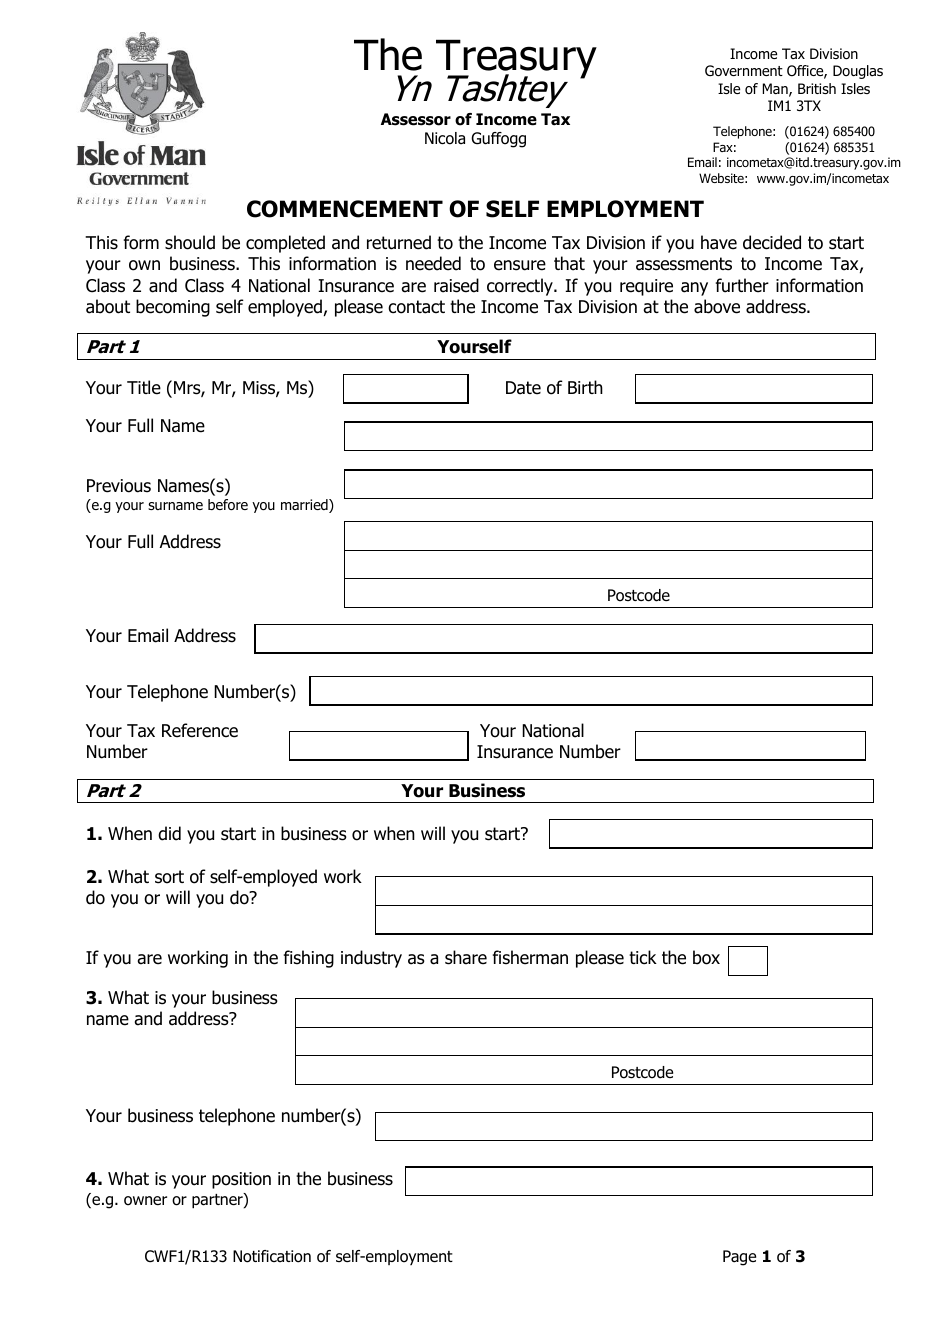 Form CWF1 / R133 Commencement of Self Employment - Isle of Man, Page 1